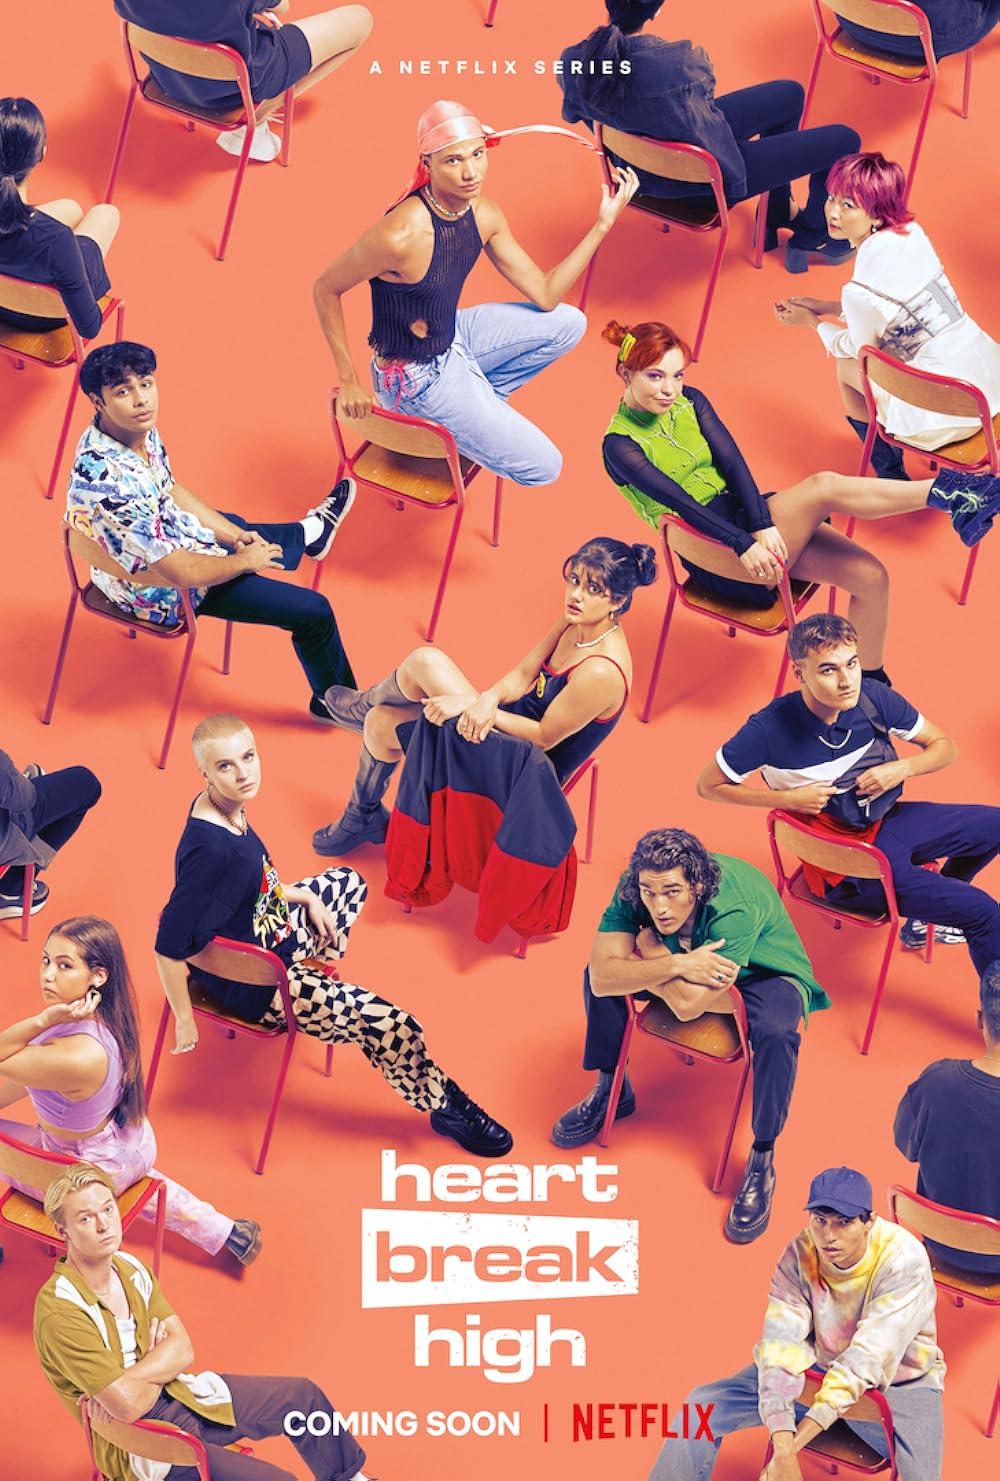 Heartbreak High Season 2 (April 11, Netflix)Season 2 of 'Heartbreak High' brings more drama and vibrancy to the halls of Hartley High in Australia. Amidst love triangles, unexpected bonds, and competitive elections, the students navigate a semester filled with discovery, love, and transformation.